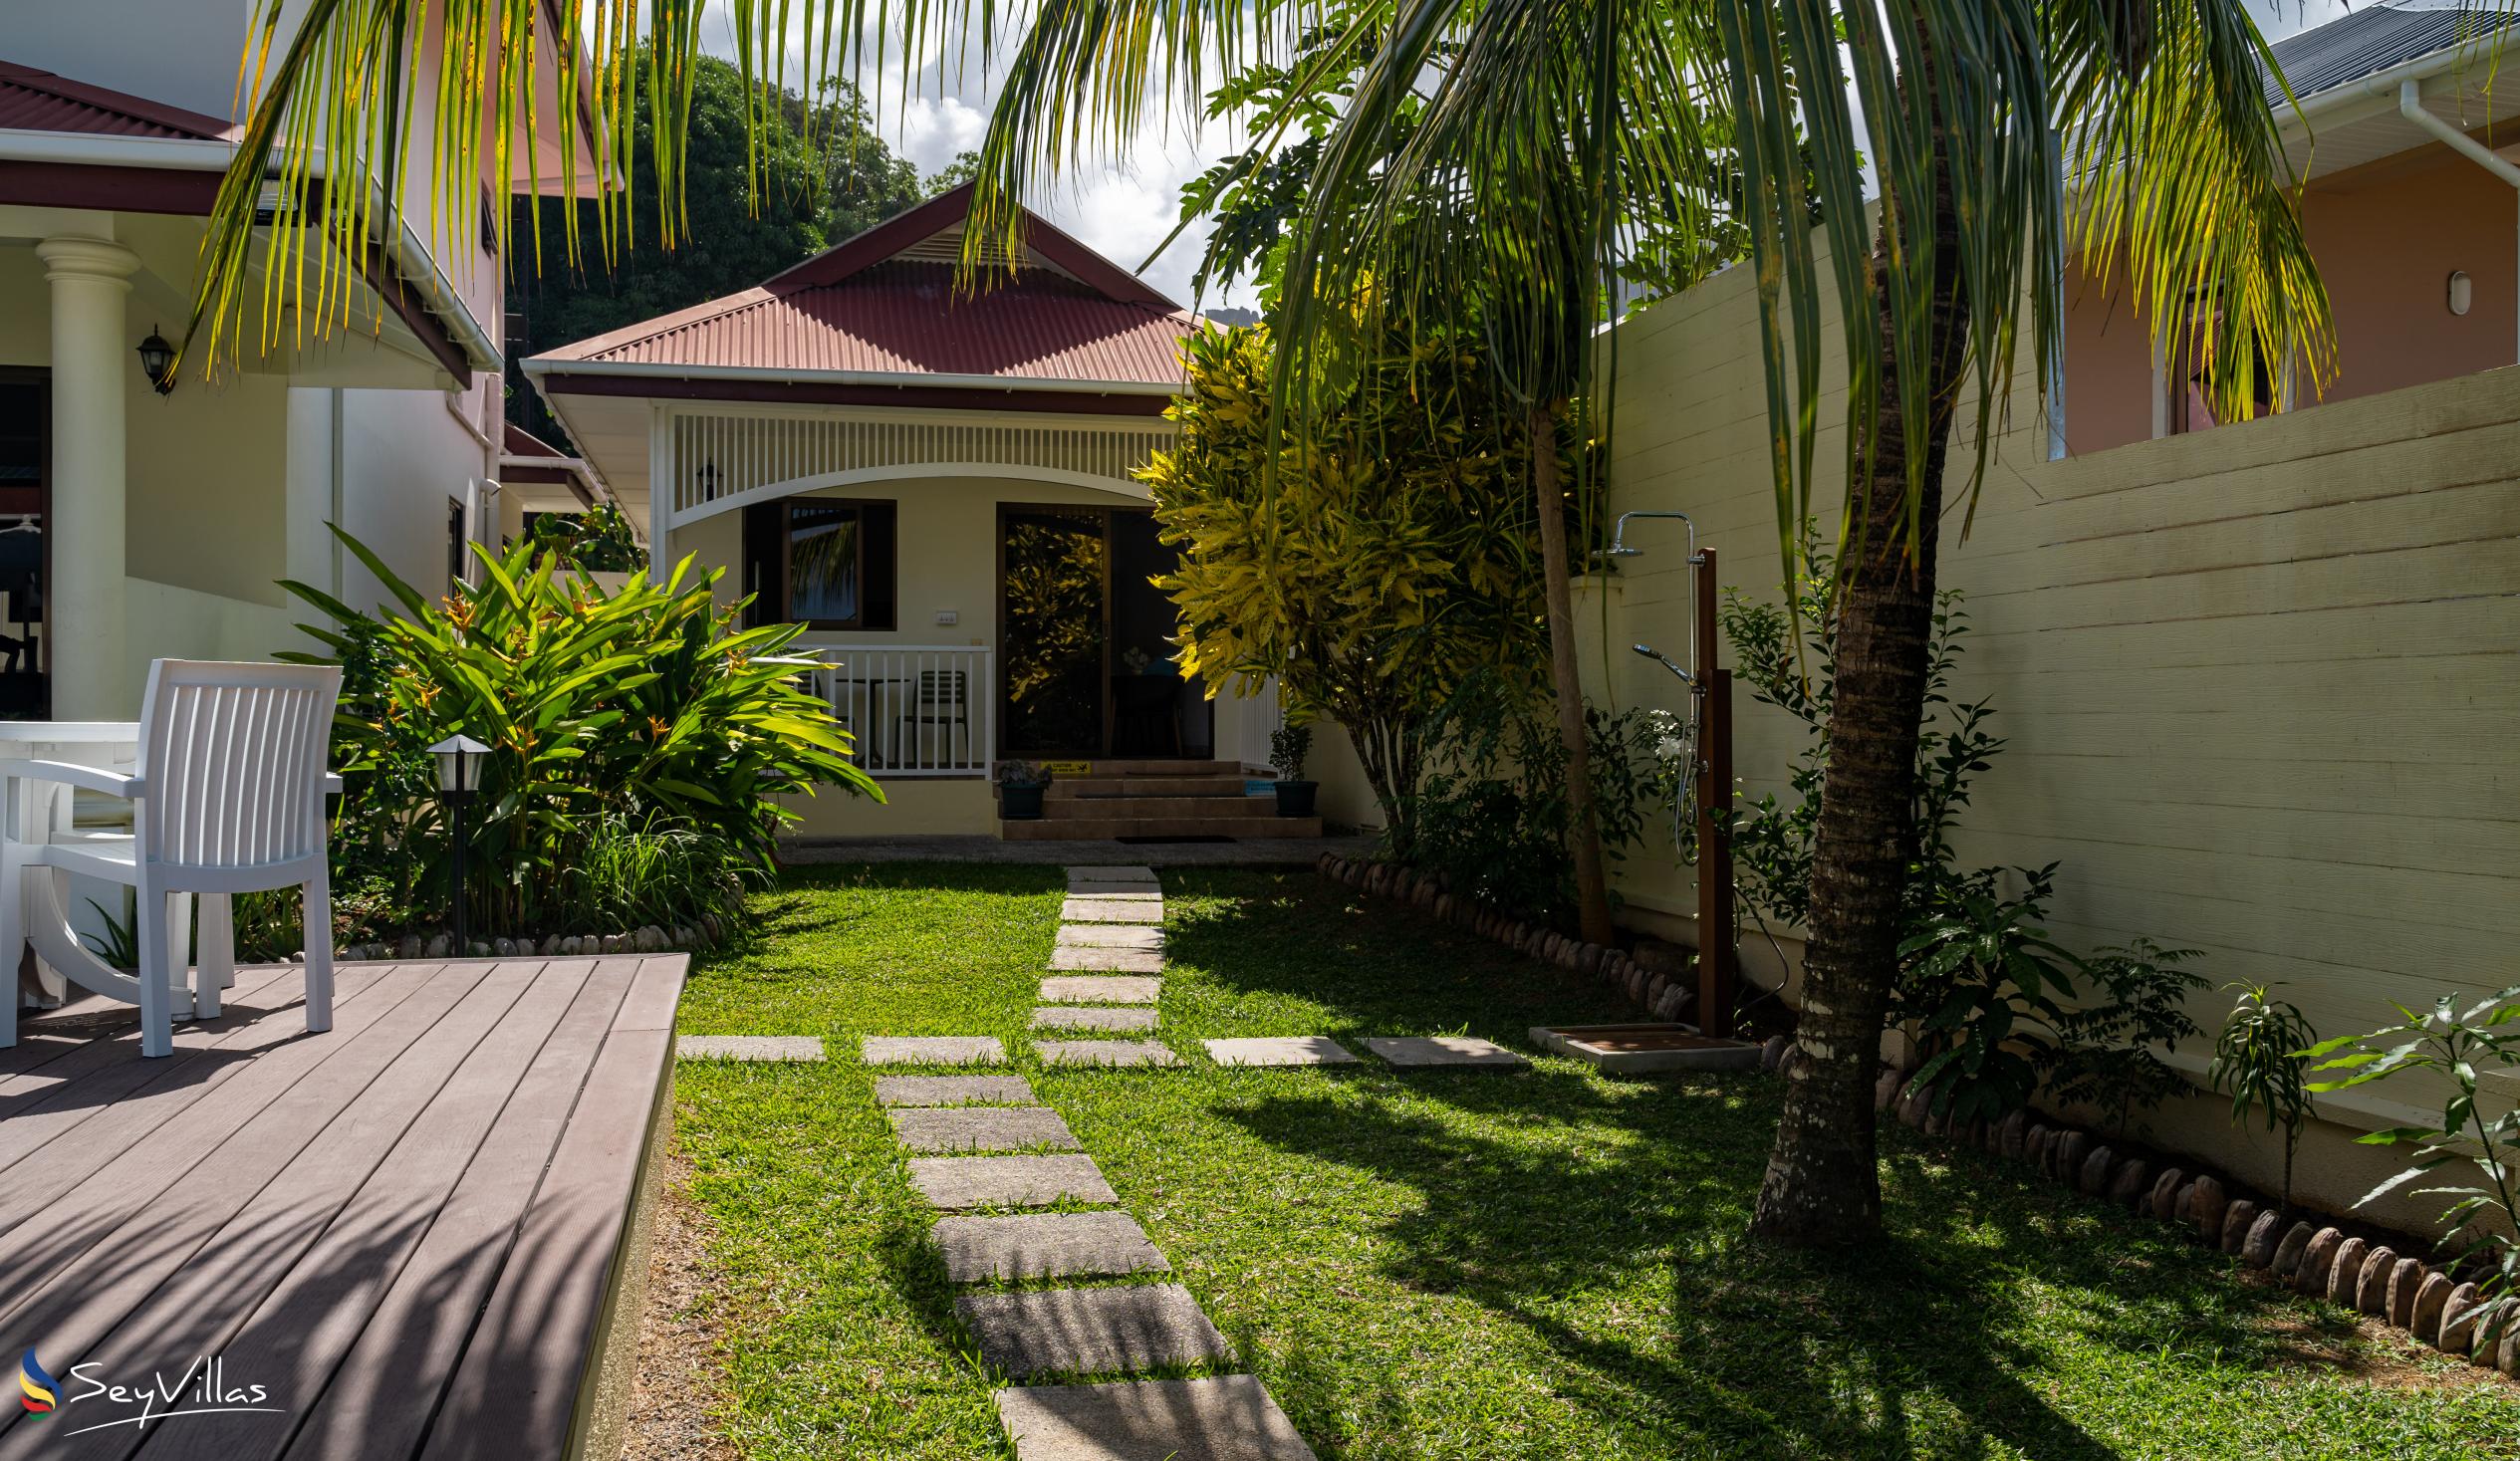 Photo 7: Emma's Guest House and Self-Catering - Outdoor area - Mahé (Seychelles)